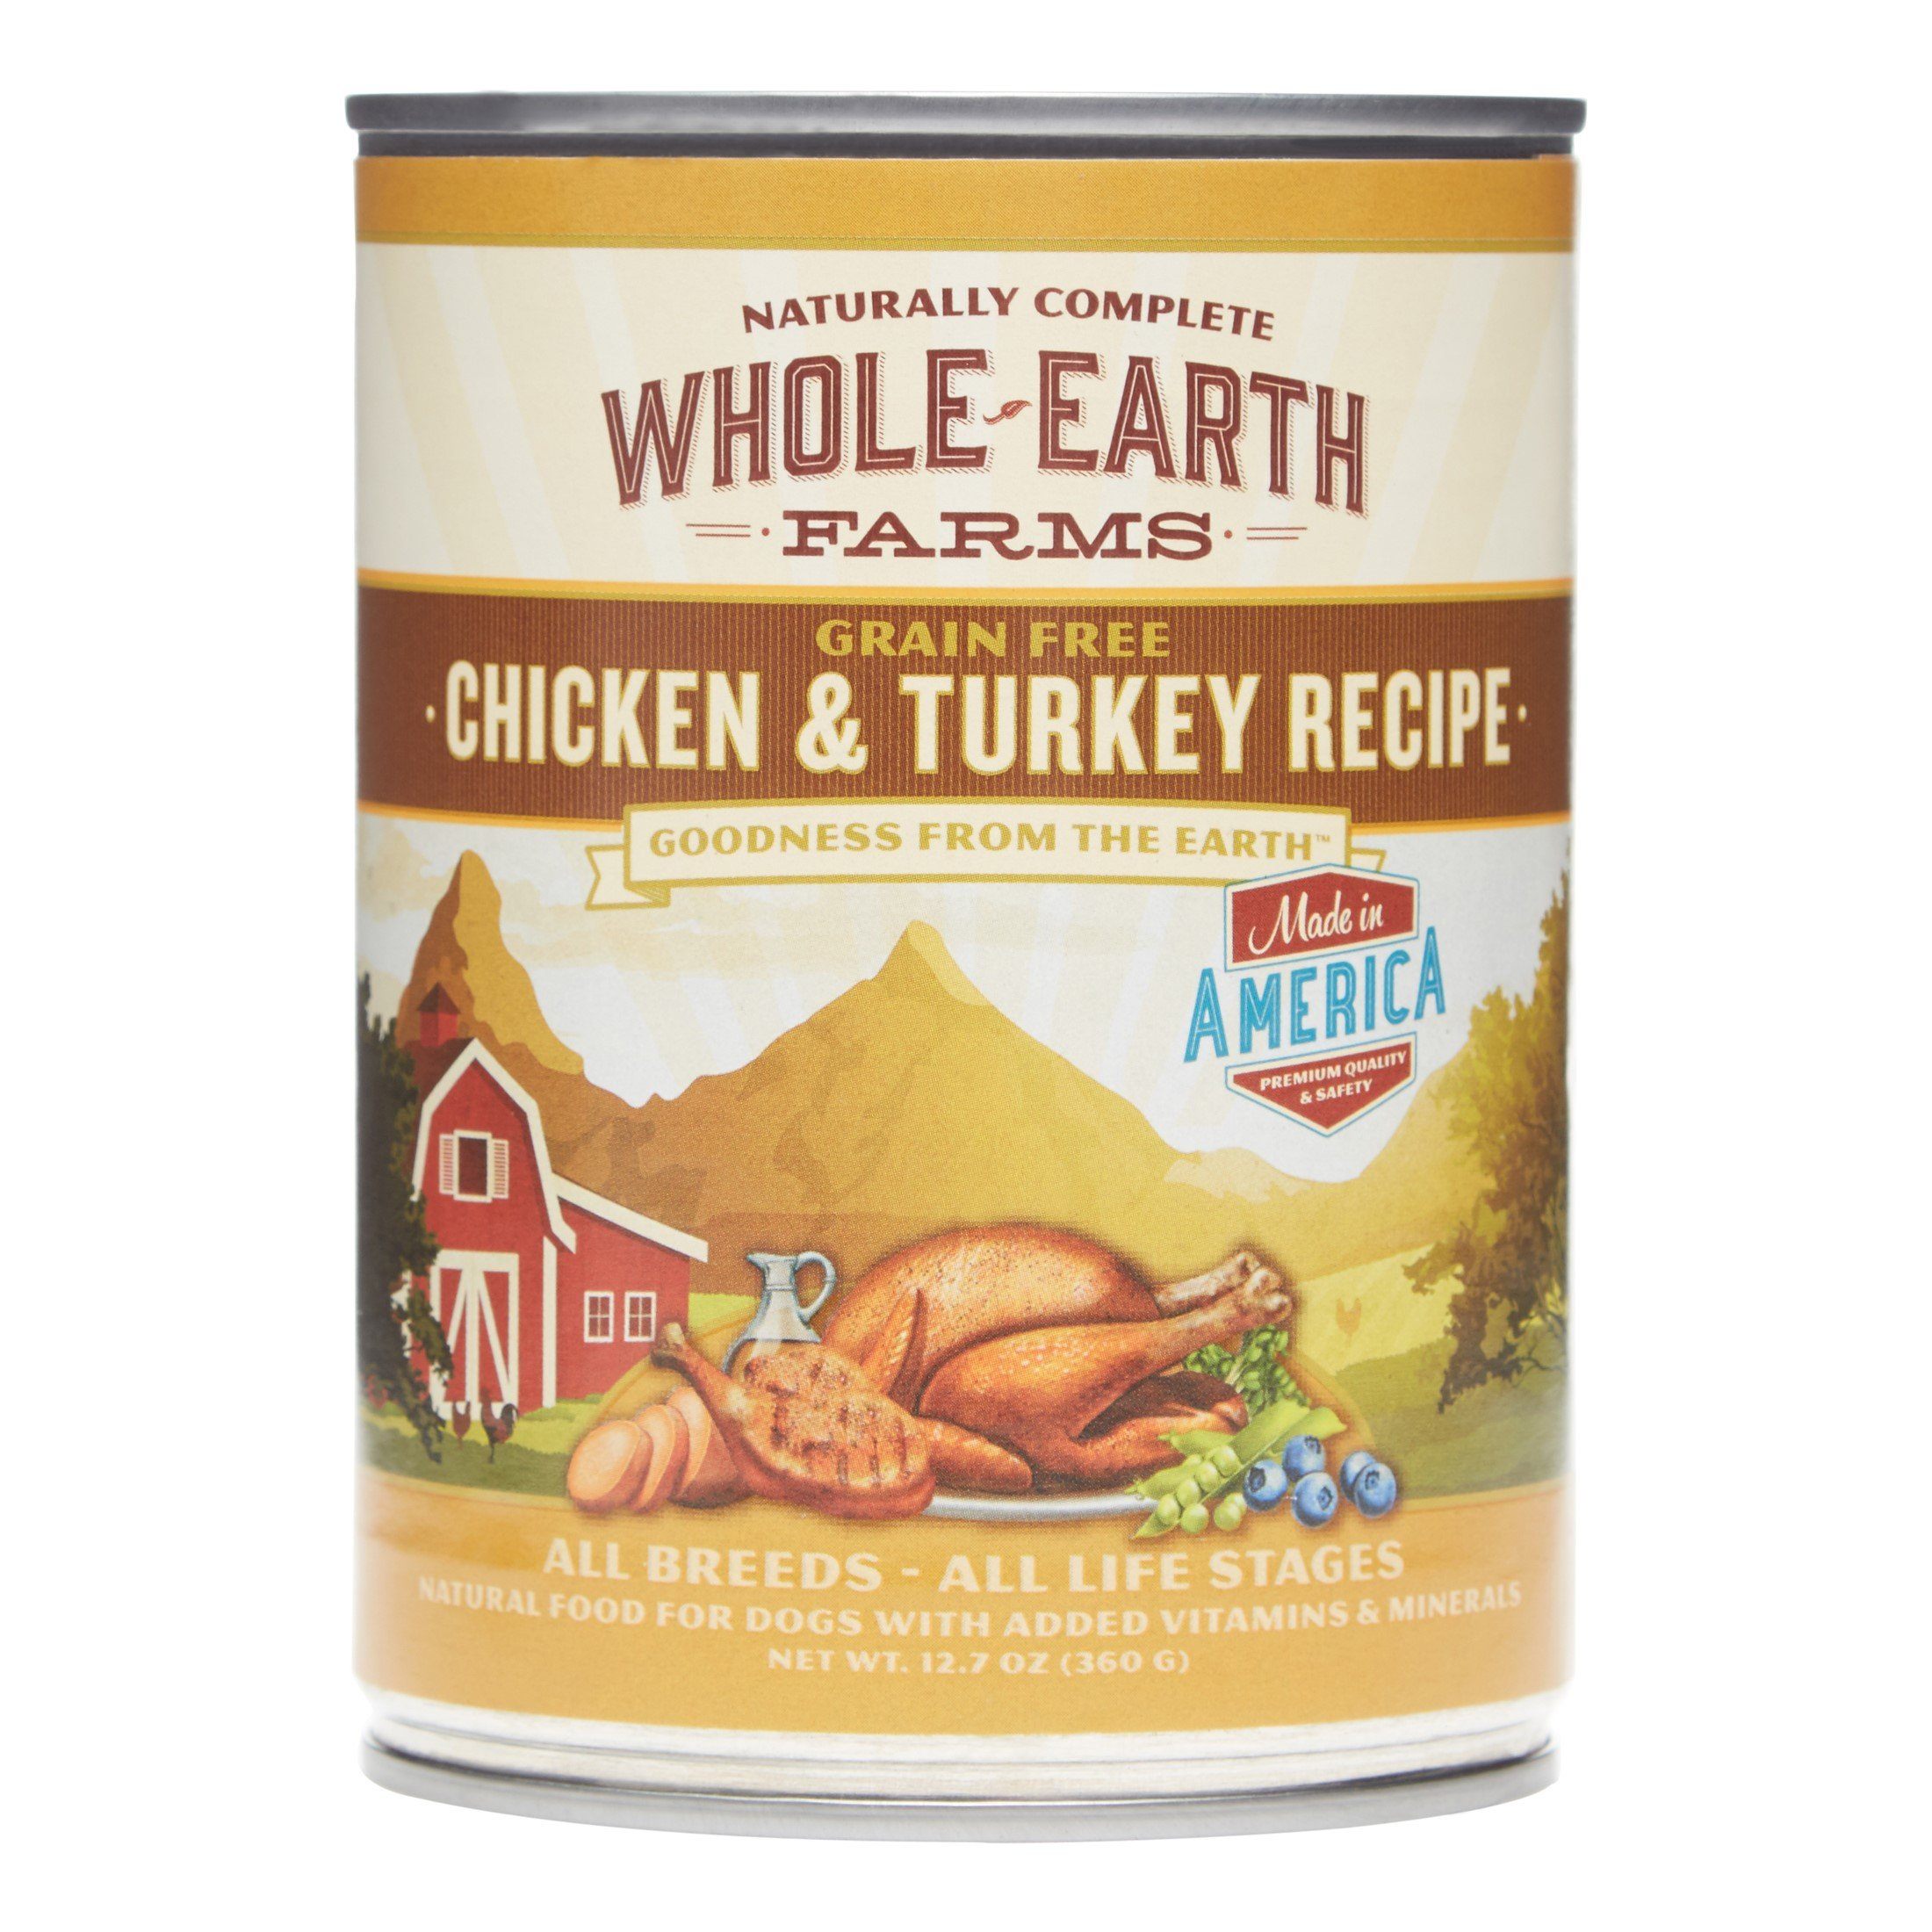 Whole Earth Farms Grian Free Chicken & Turkey Recipe Canned Dog Food - 12.7 oz Cans - Case of 12  